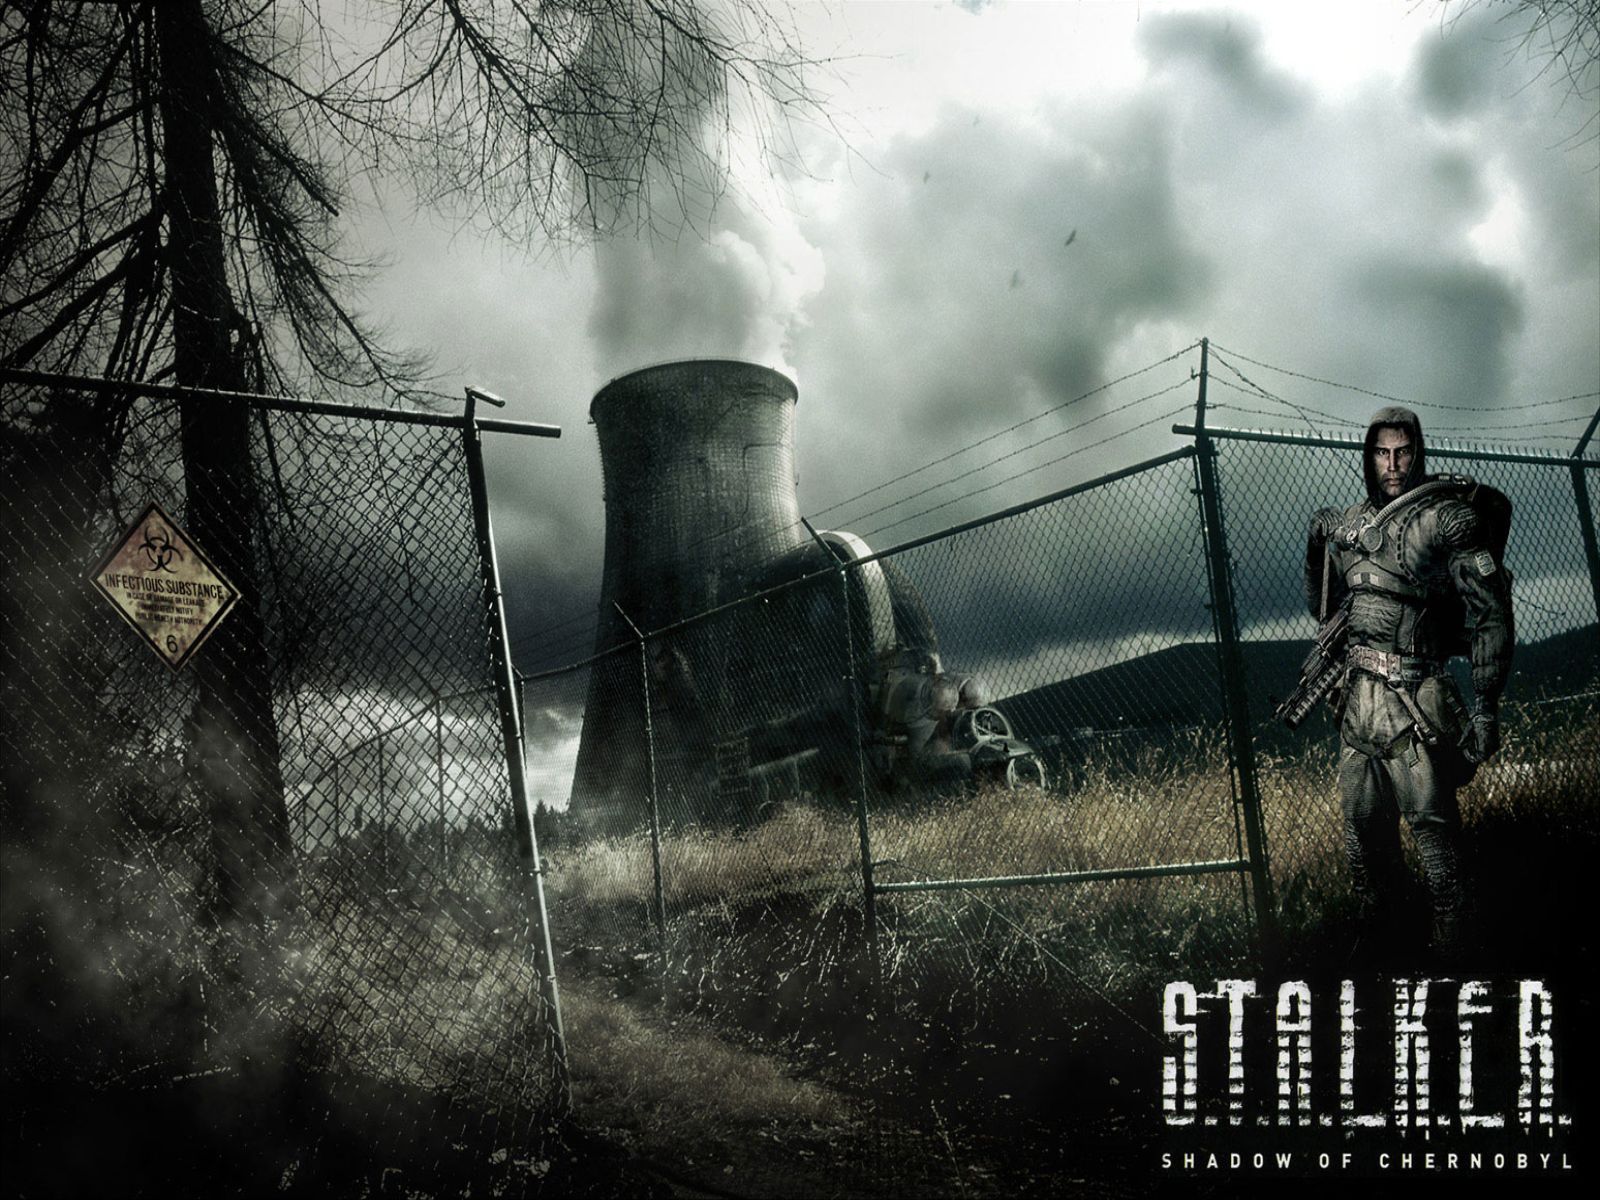 Outside Factory Action Rpg Games Wallpaper Image Featuring Stalker